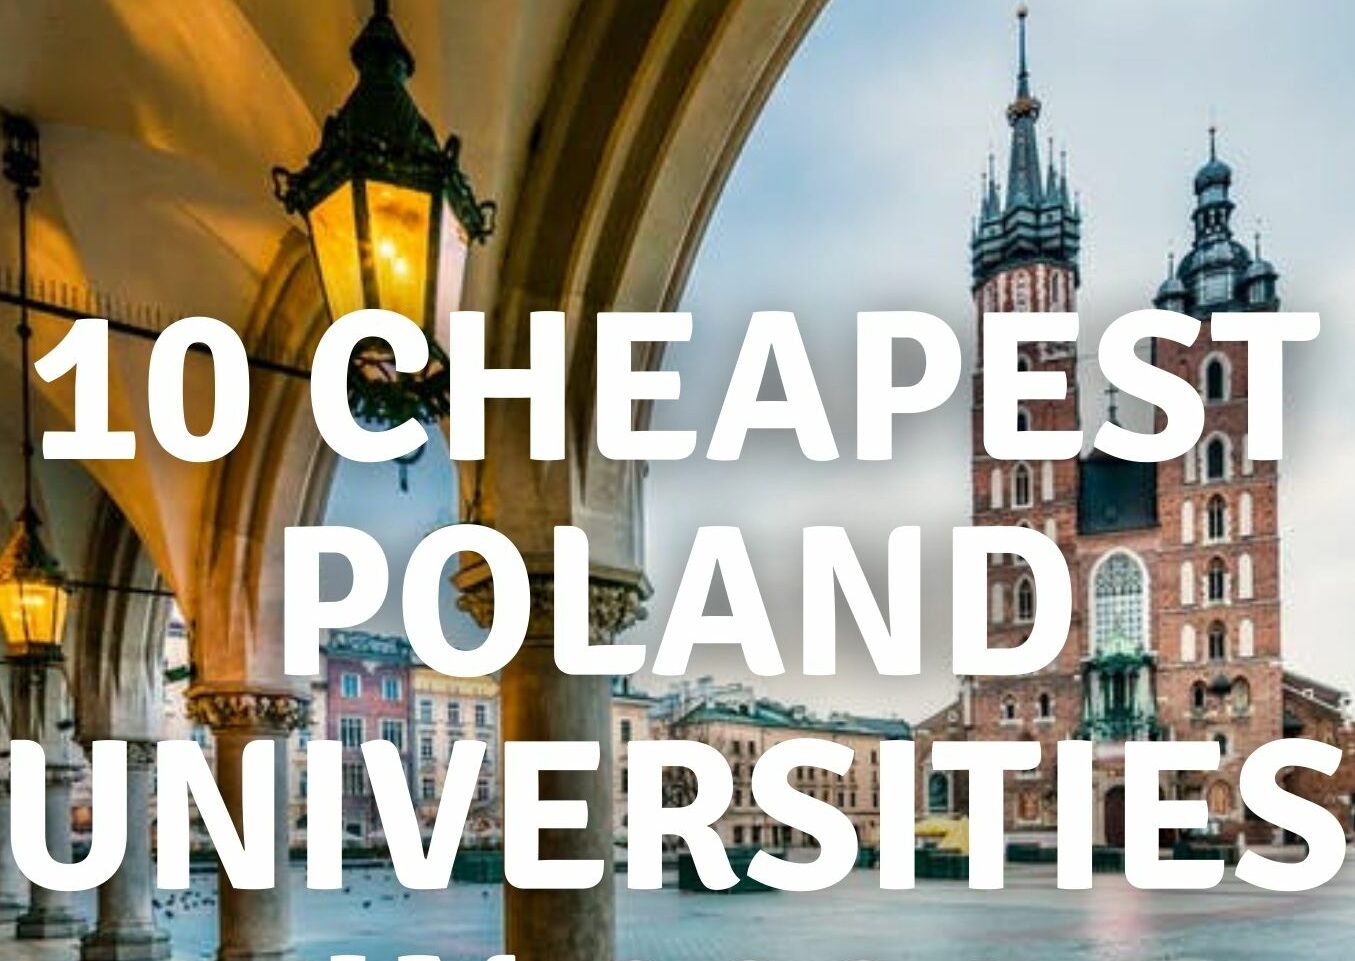 Cheapest Poland Universities in 2021